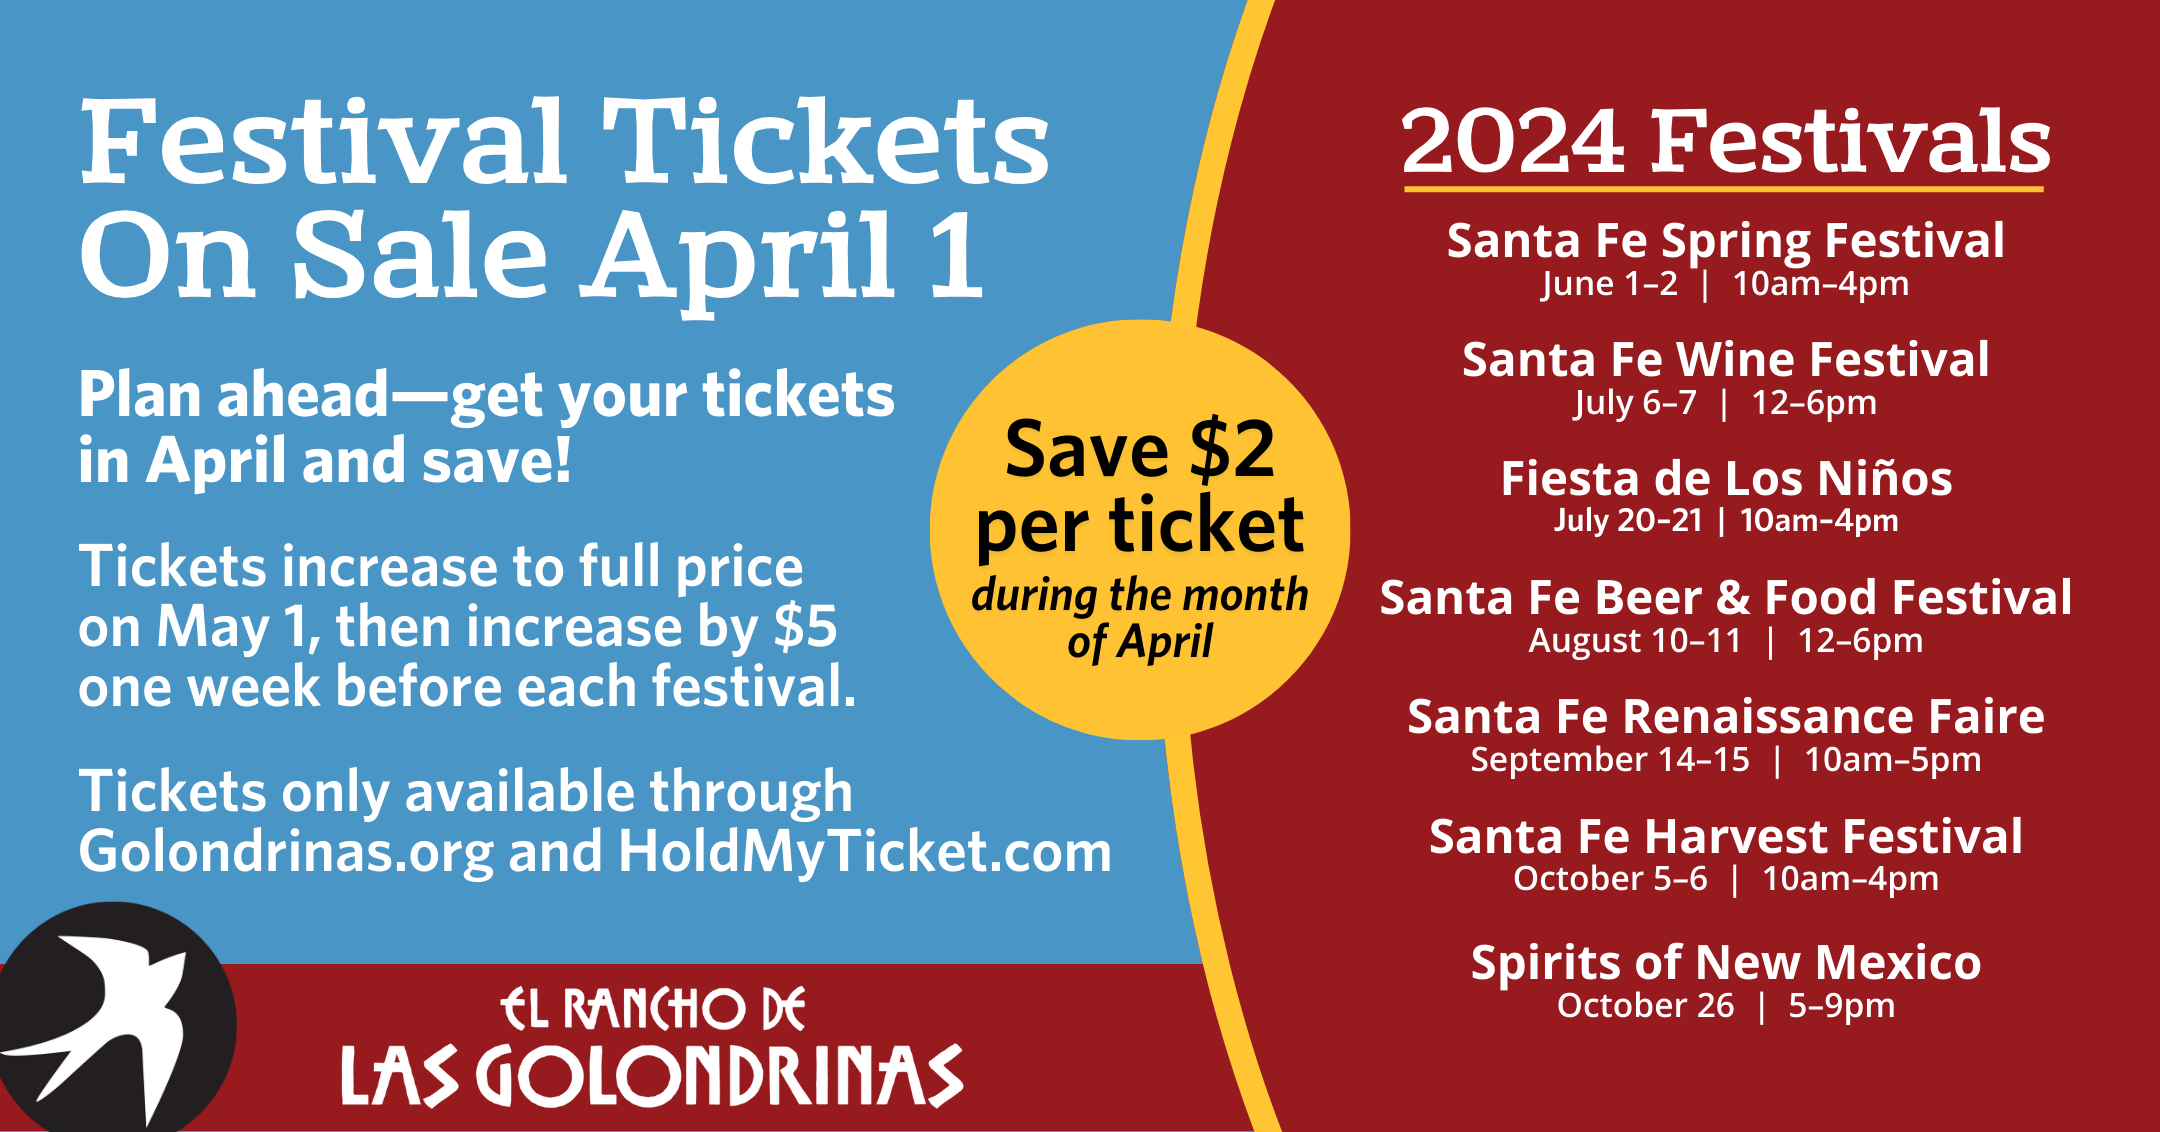 Festival Tickets on sale April 1. Save $2 per ticket in the month of April. Tickets increase to full price on May 1, and increase by $5 one week before each festival. Tickets Only available through Holdmyticket.com and golondrinas.org